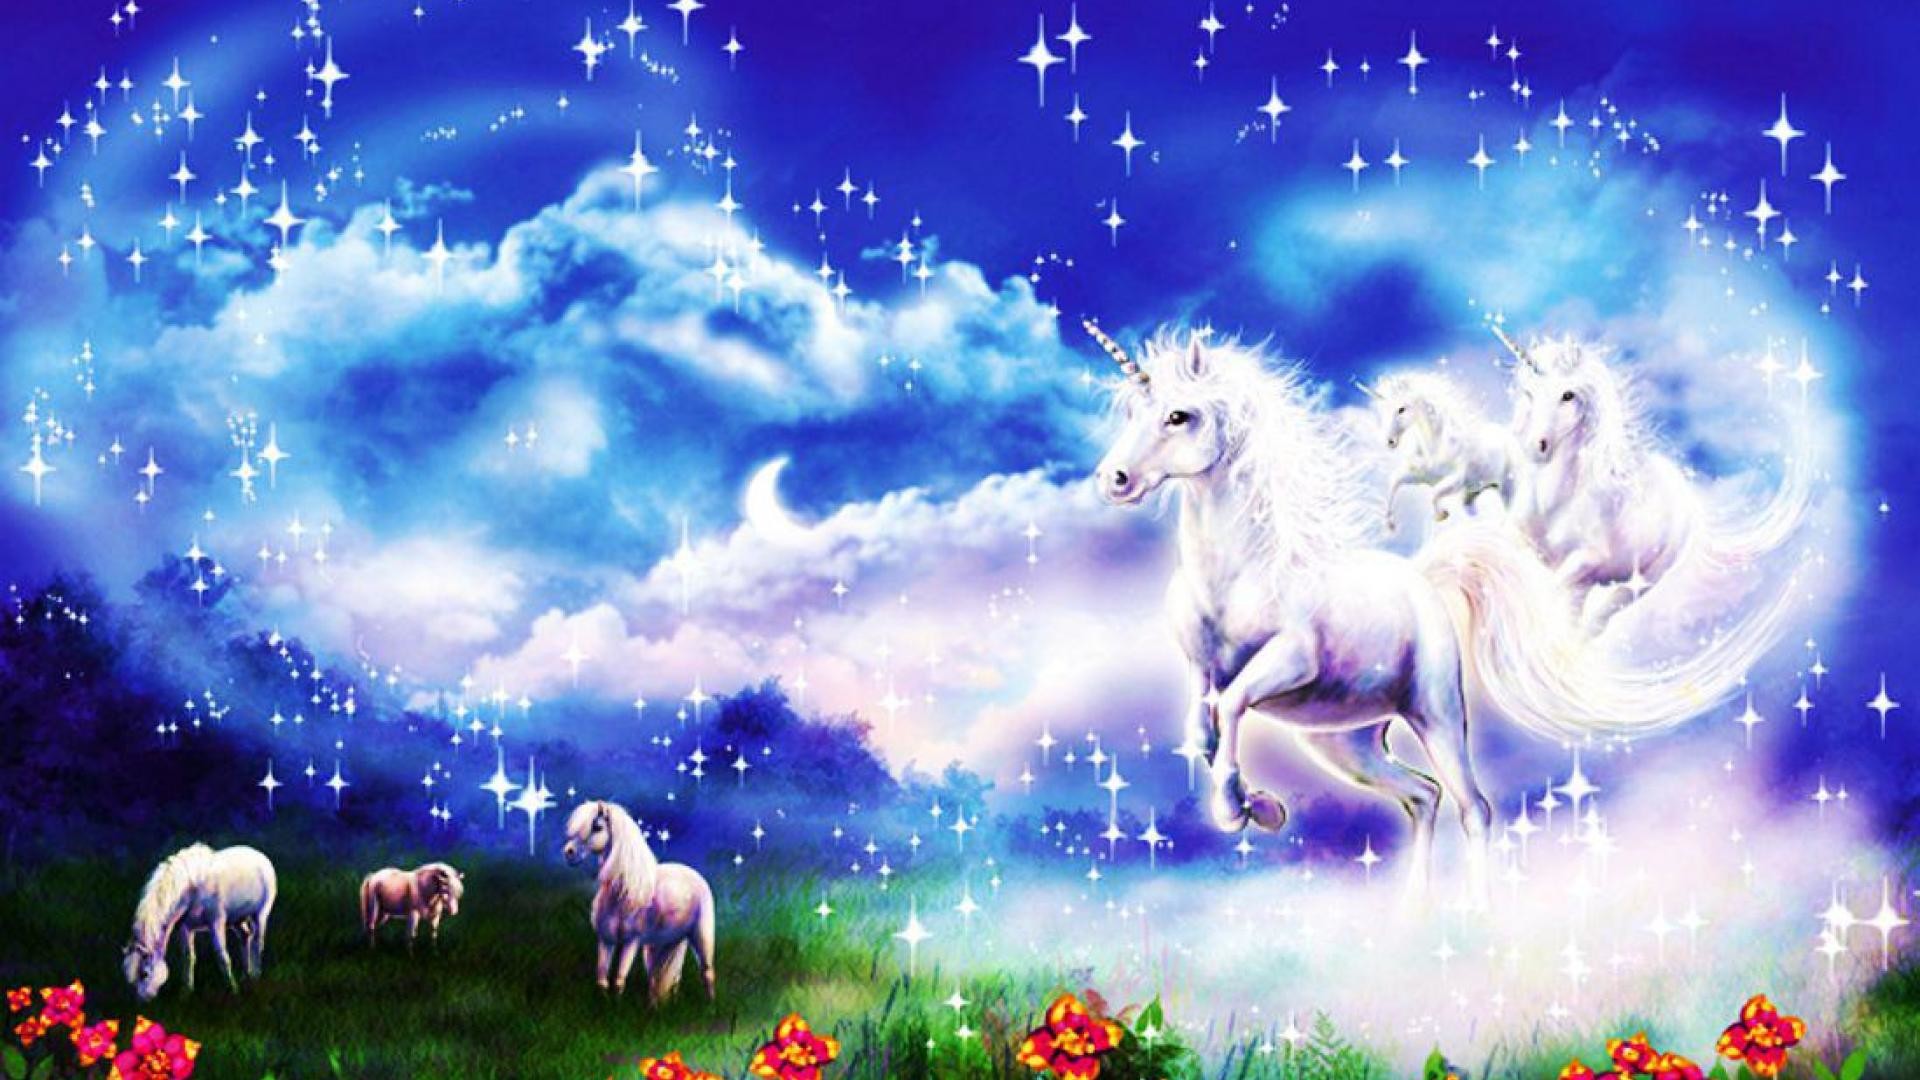 1920x1080 Spirit of unicorn 141404 High Quality and Resolution Wallpapers 